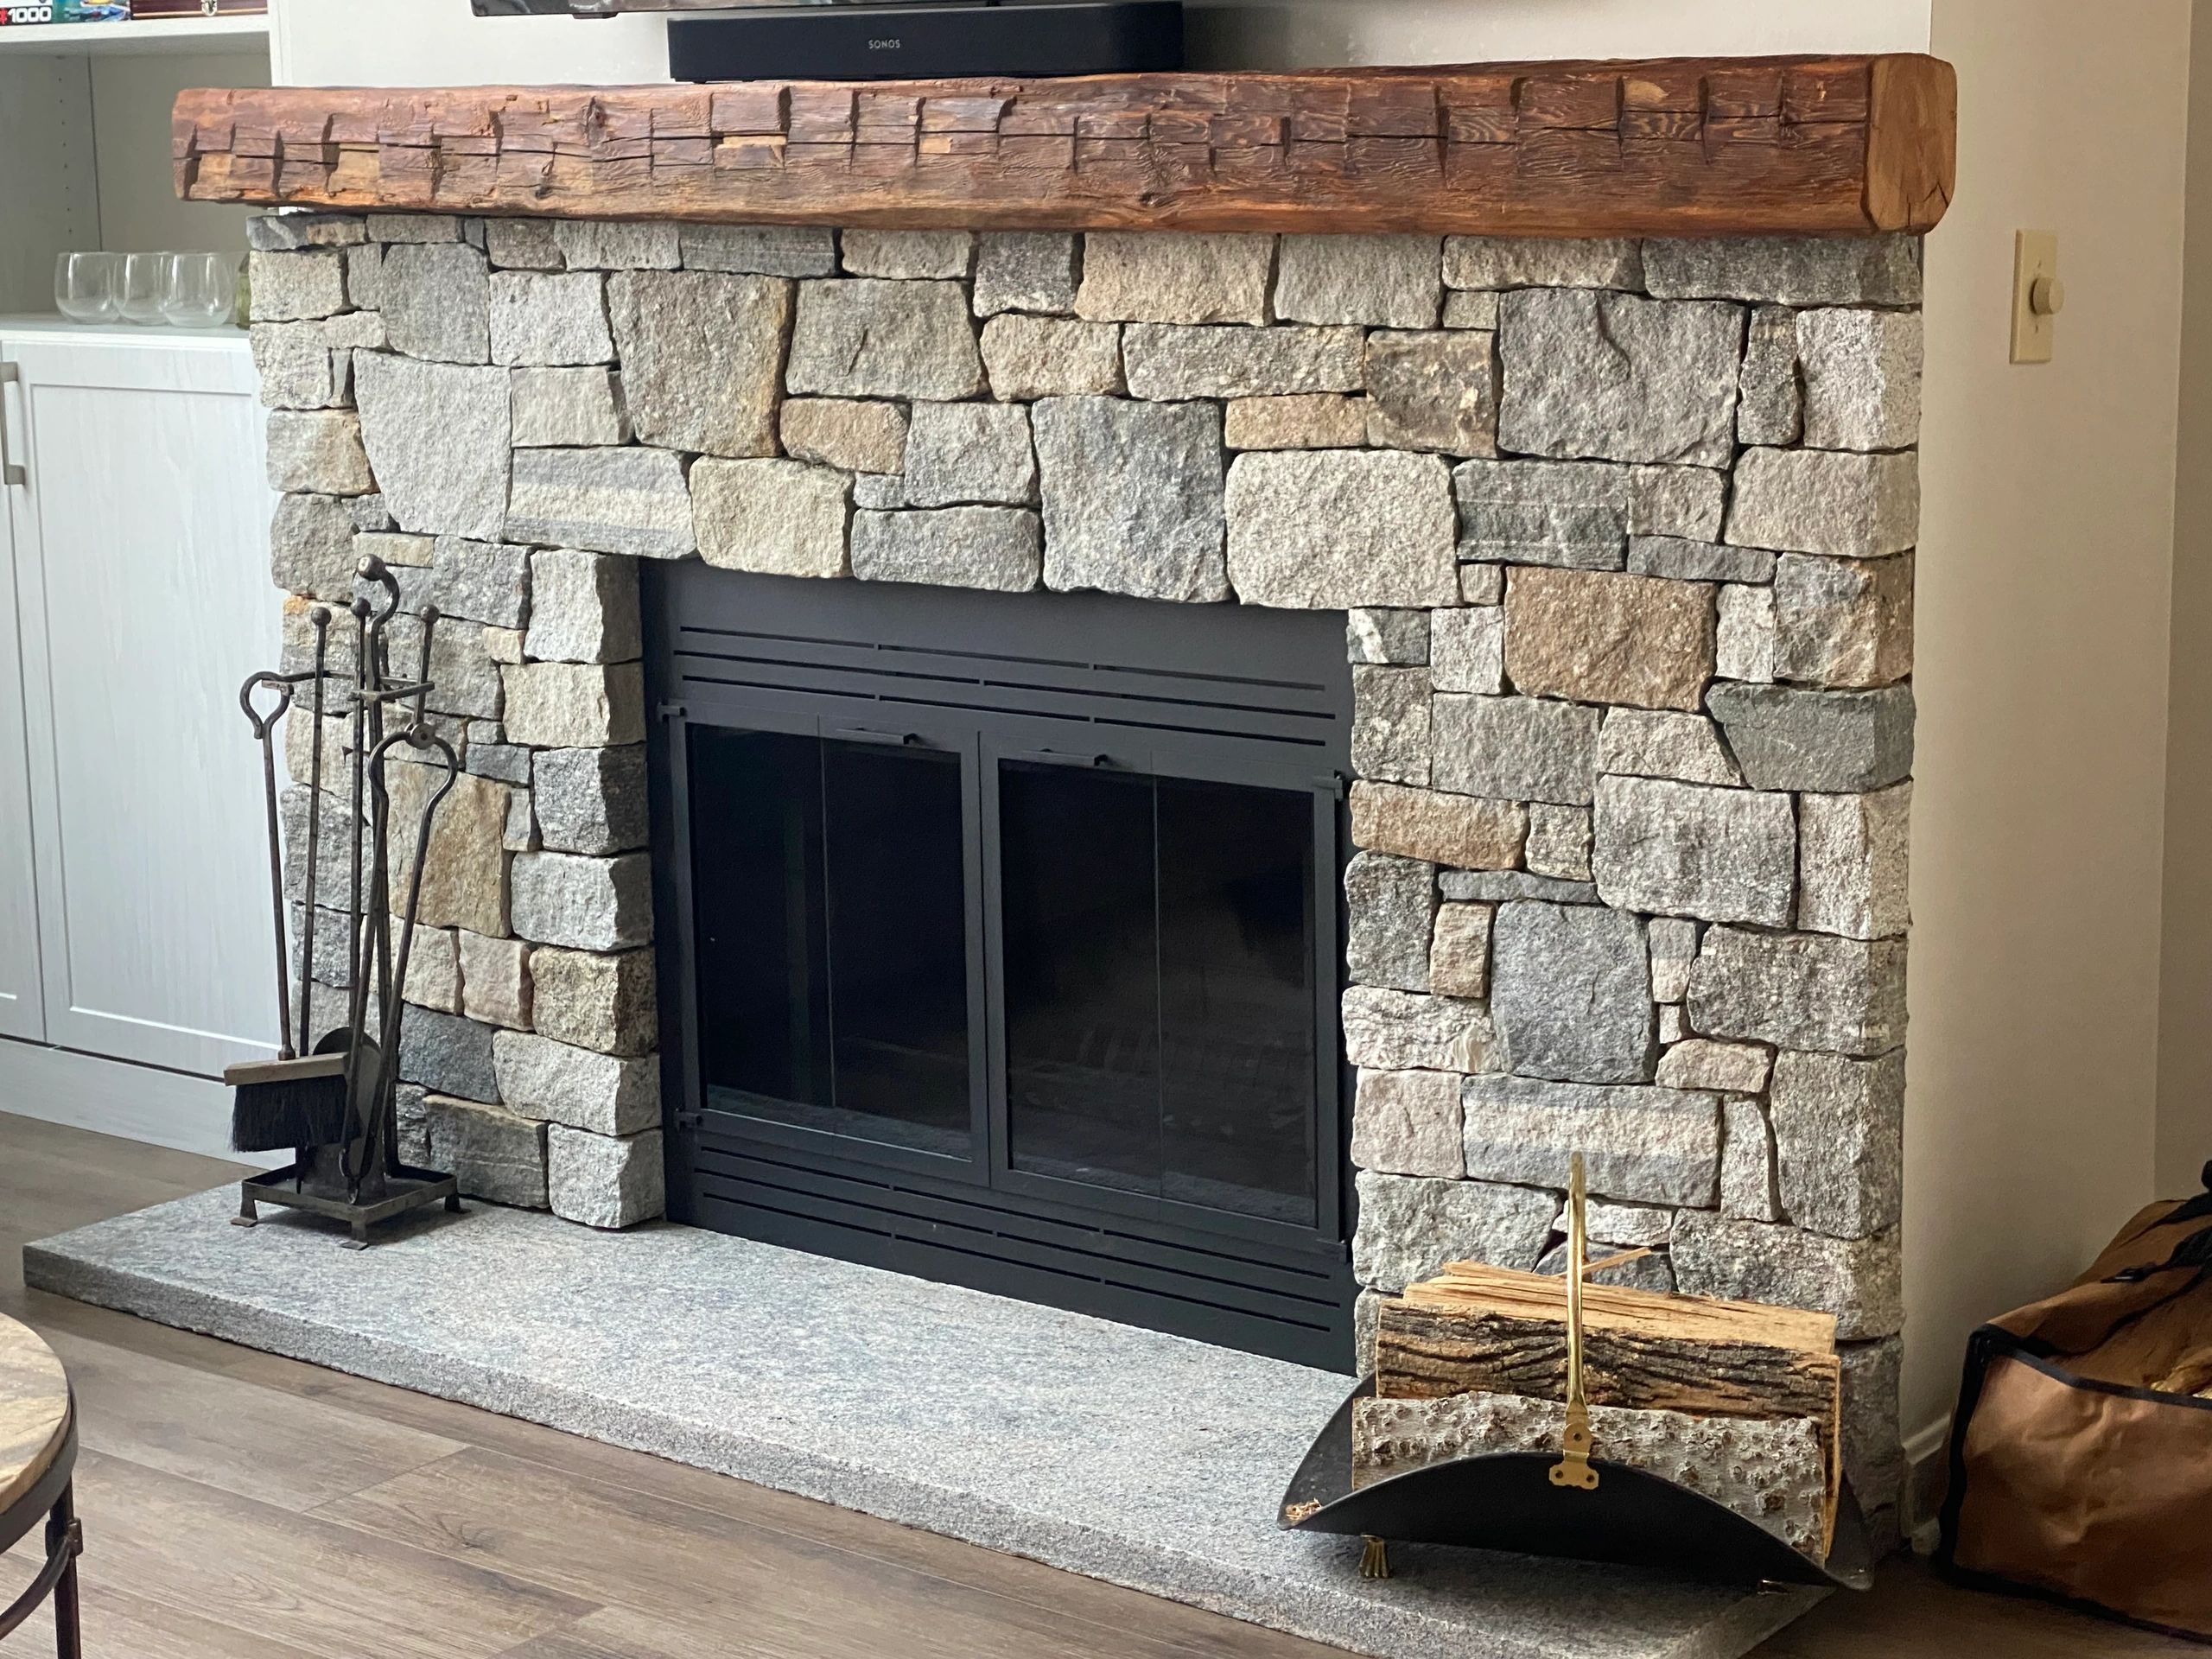 Green Mountain Fireplace Specialties in Ludlow, Vermont